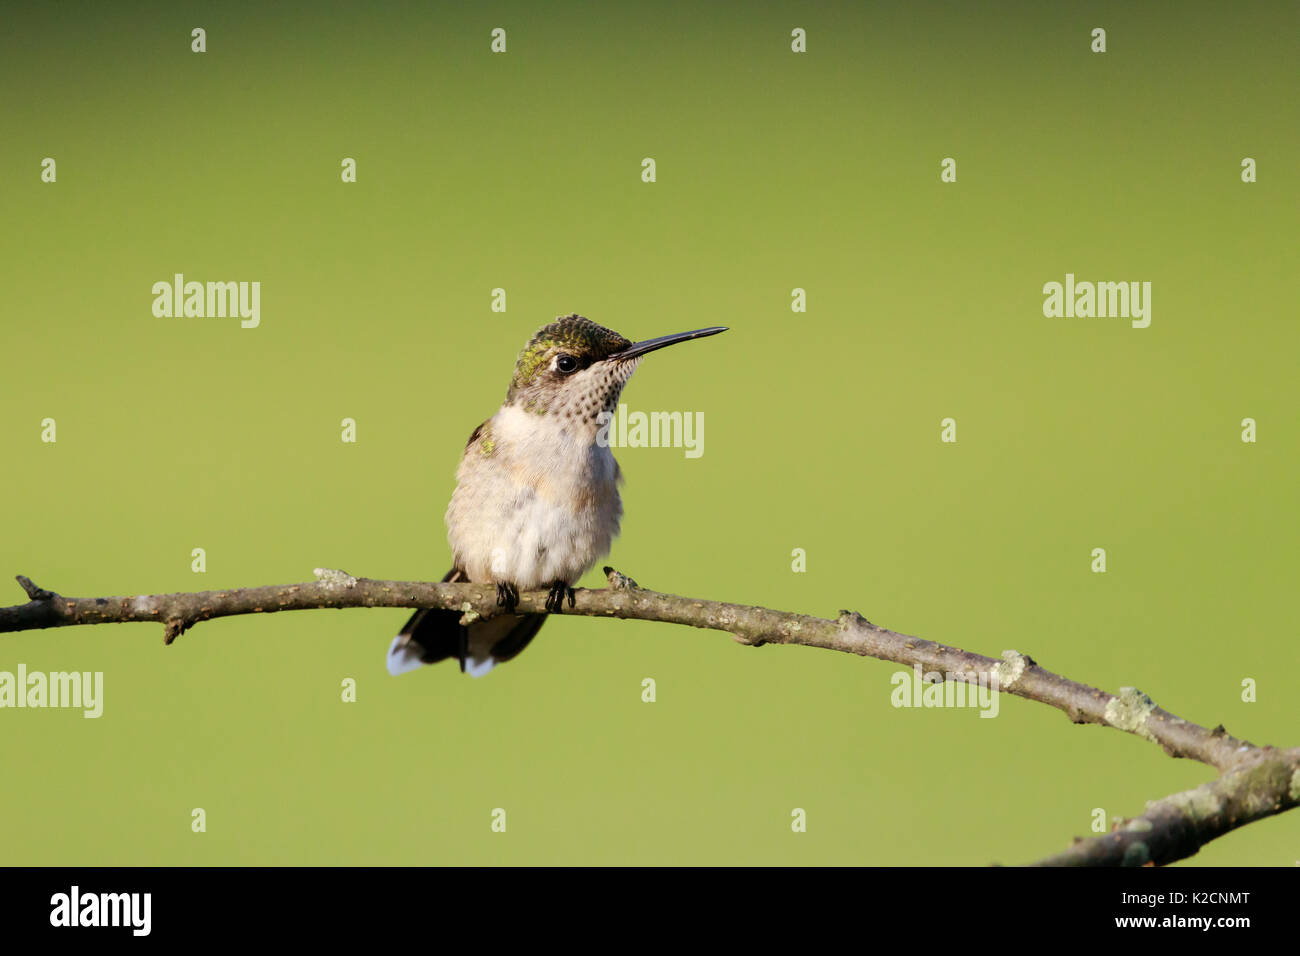 Female Ruby-throated hummingbird, Archilochus colubris, perched on a branch looking left toward viewer, shot from her front. Stock Photo